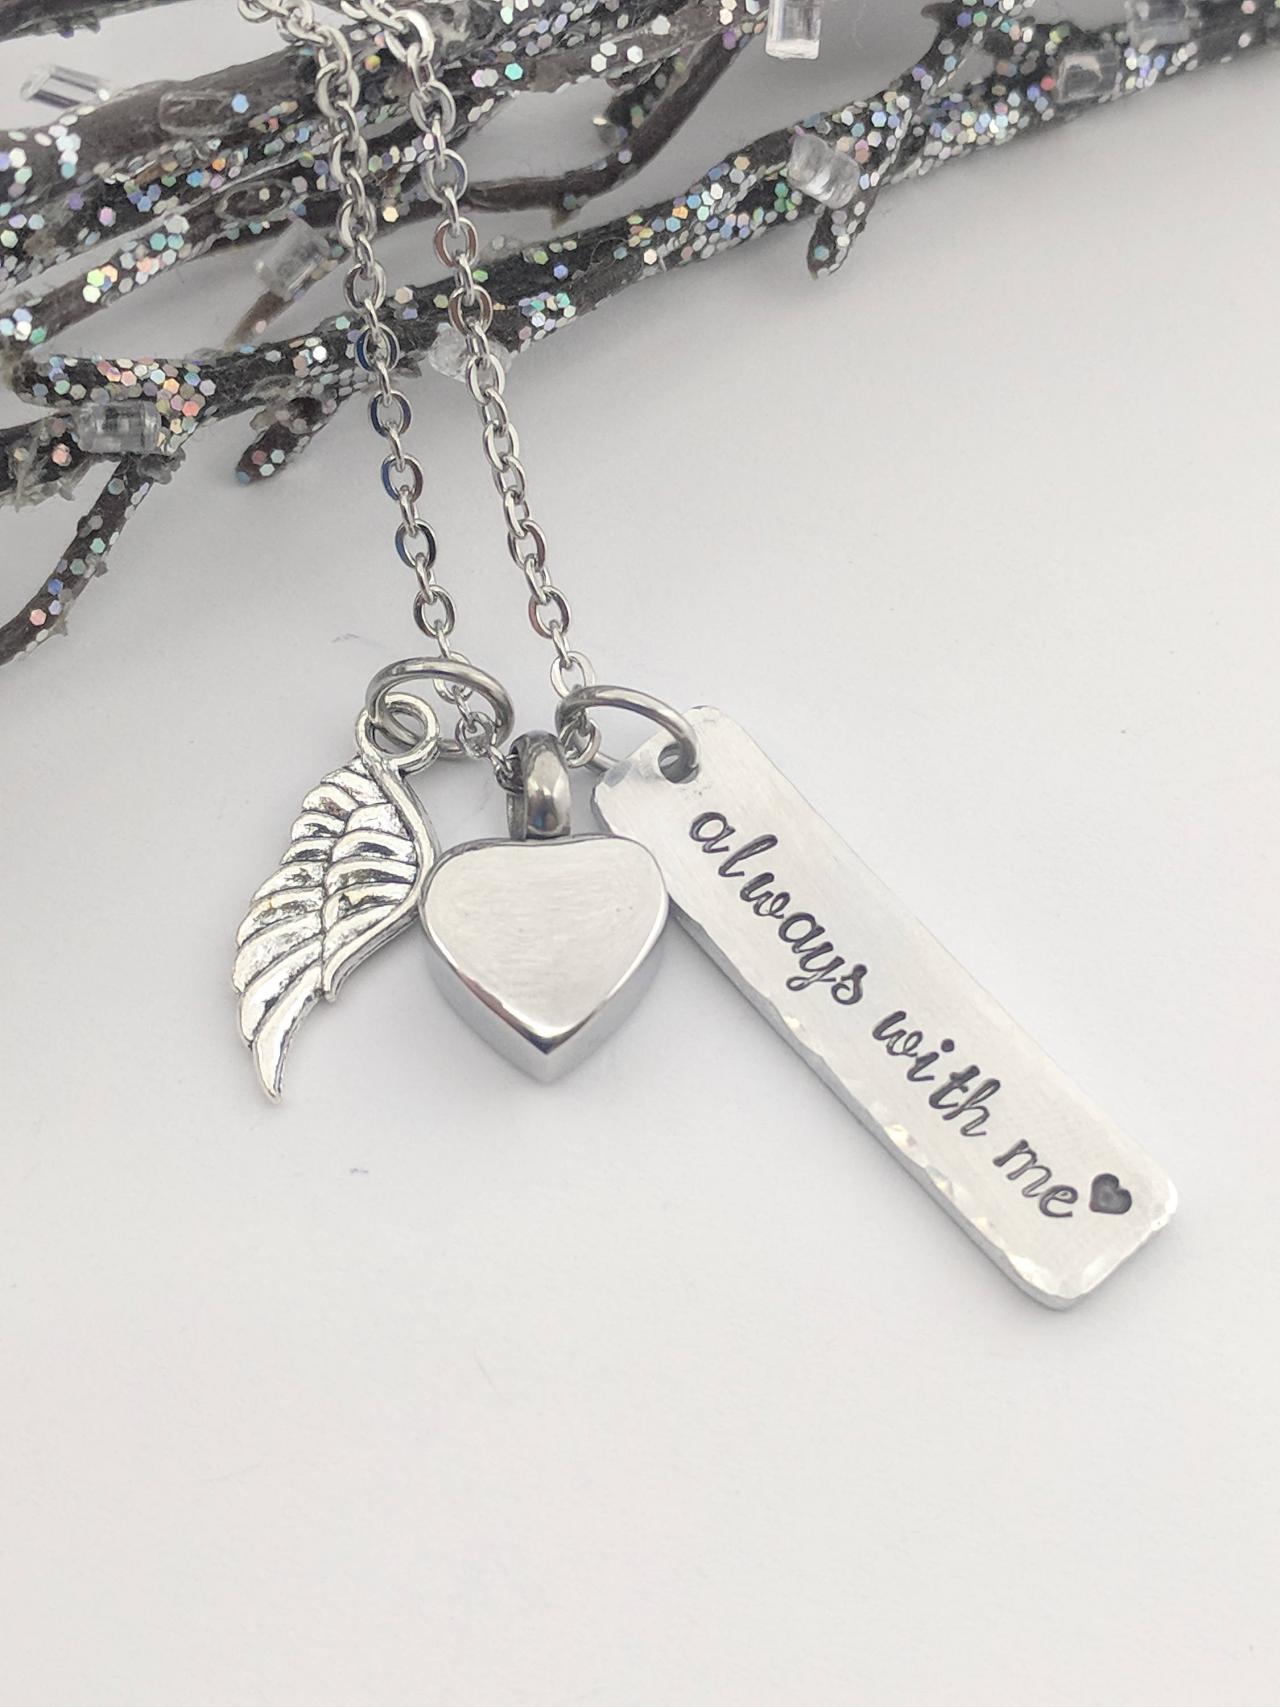 Hand Stamped Necklace Always With Me-urn Jewelry-cremation Urn Jewelry-heart Urn Necklace-ashes Necklace-necklace For Ashes-ashes